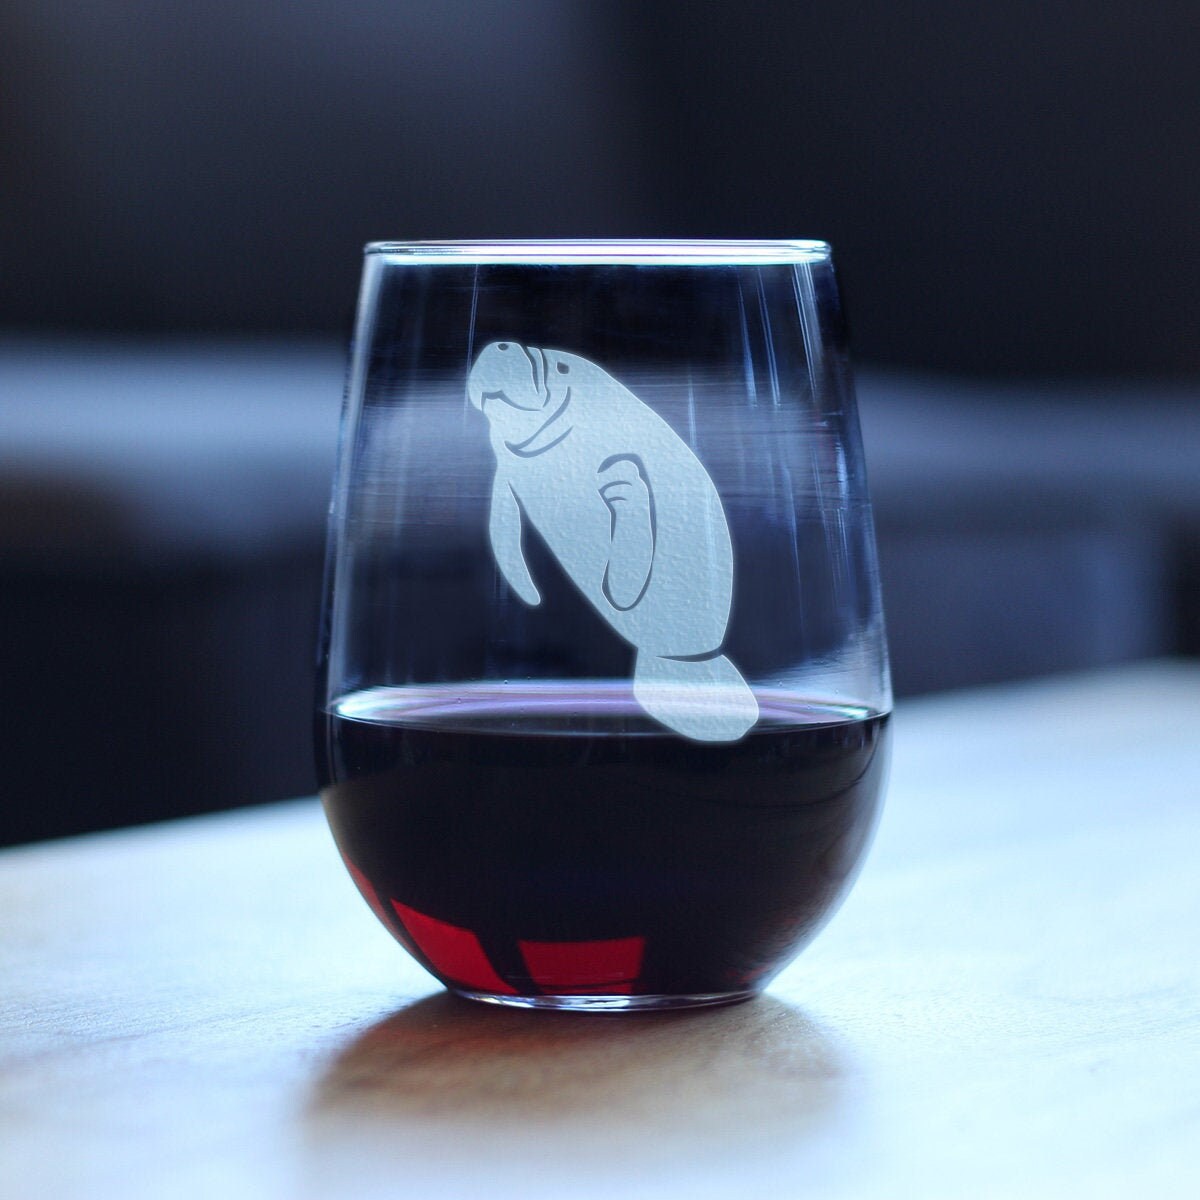 Manatee Cute Stemless Wine Glass Beach House Decor Gifts for